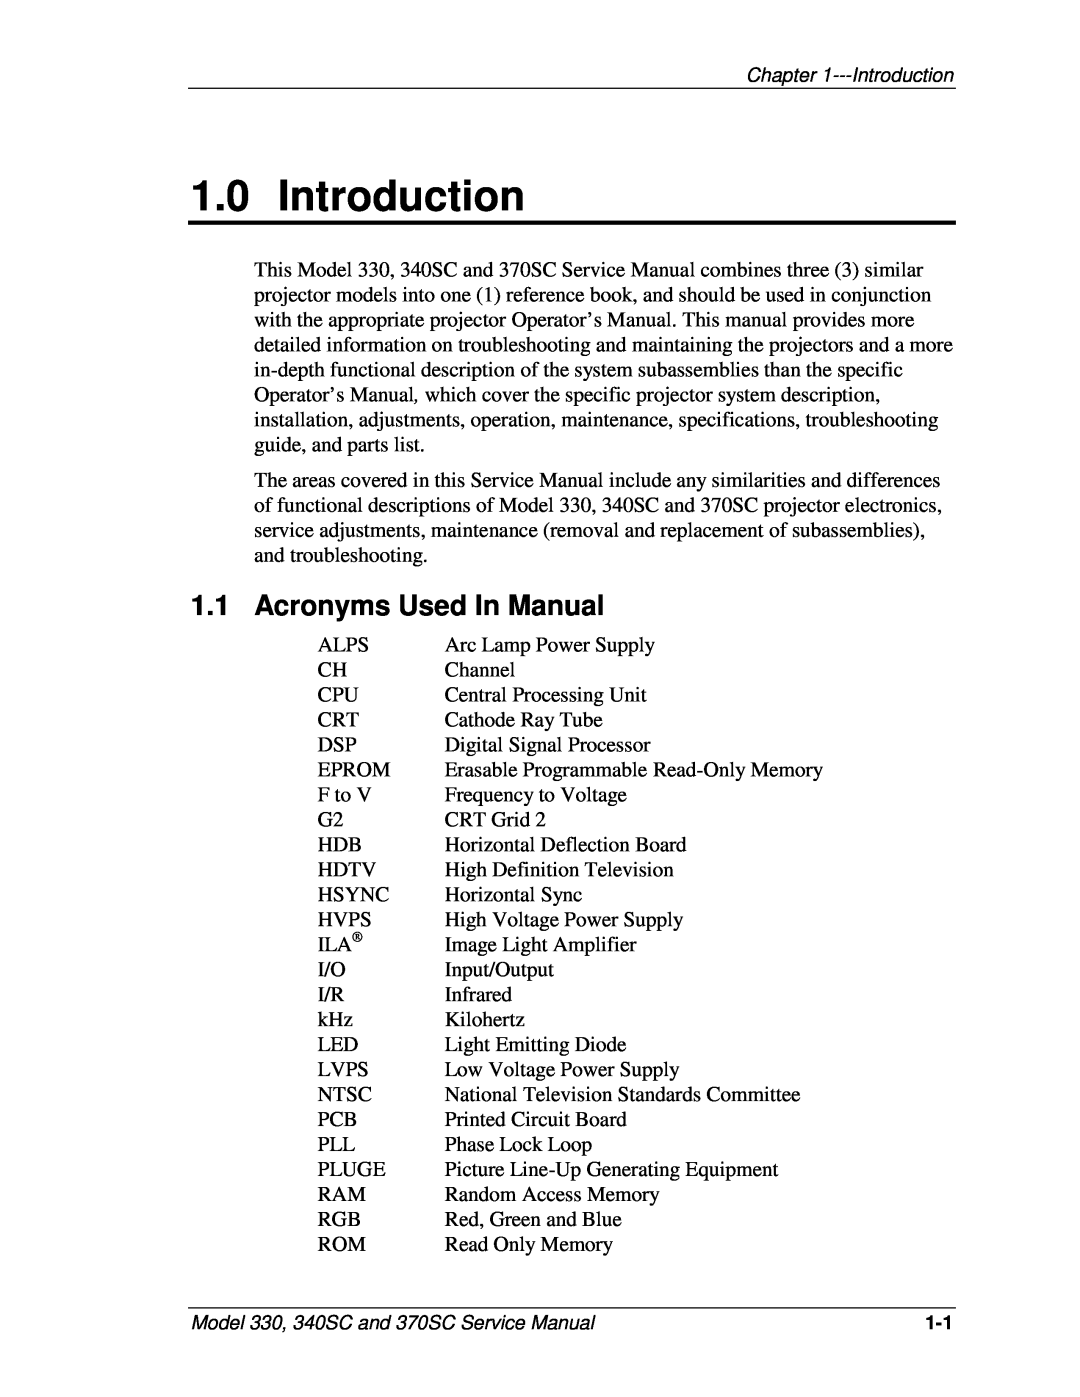 JVC 370 SC, 330, 340 SC service manual Introduction, Acronyms Used In Manual 